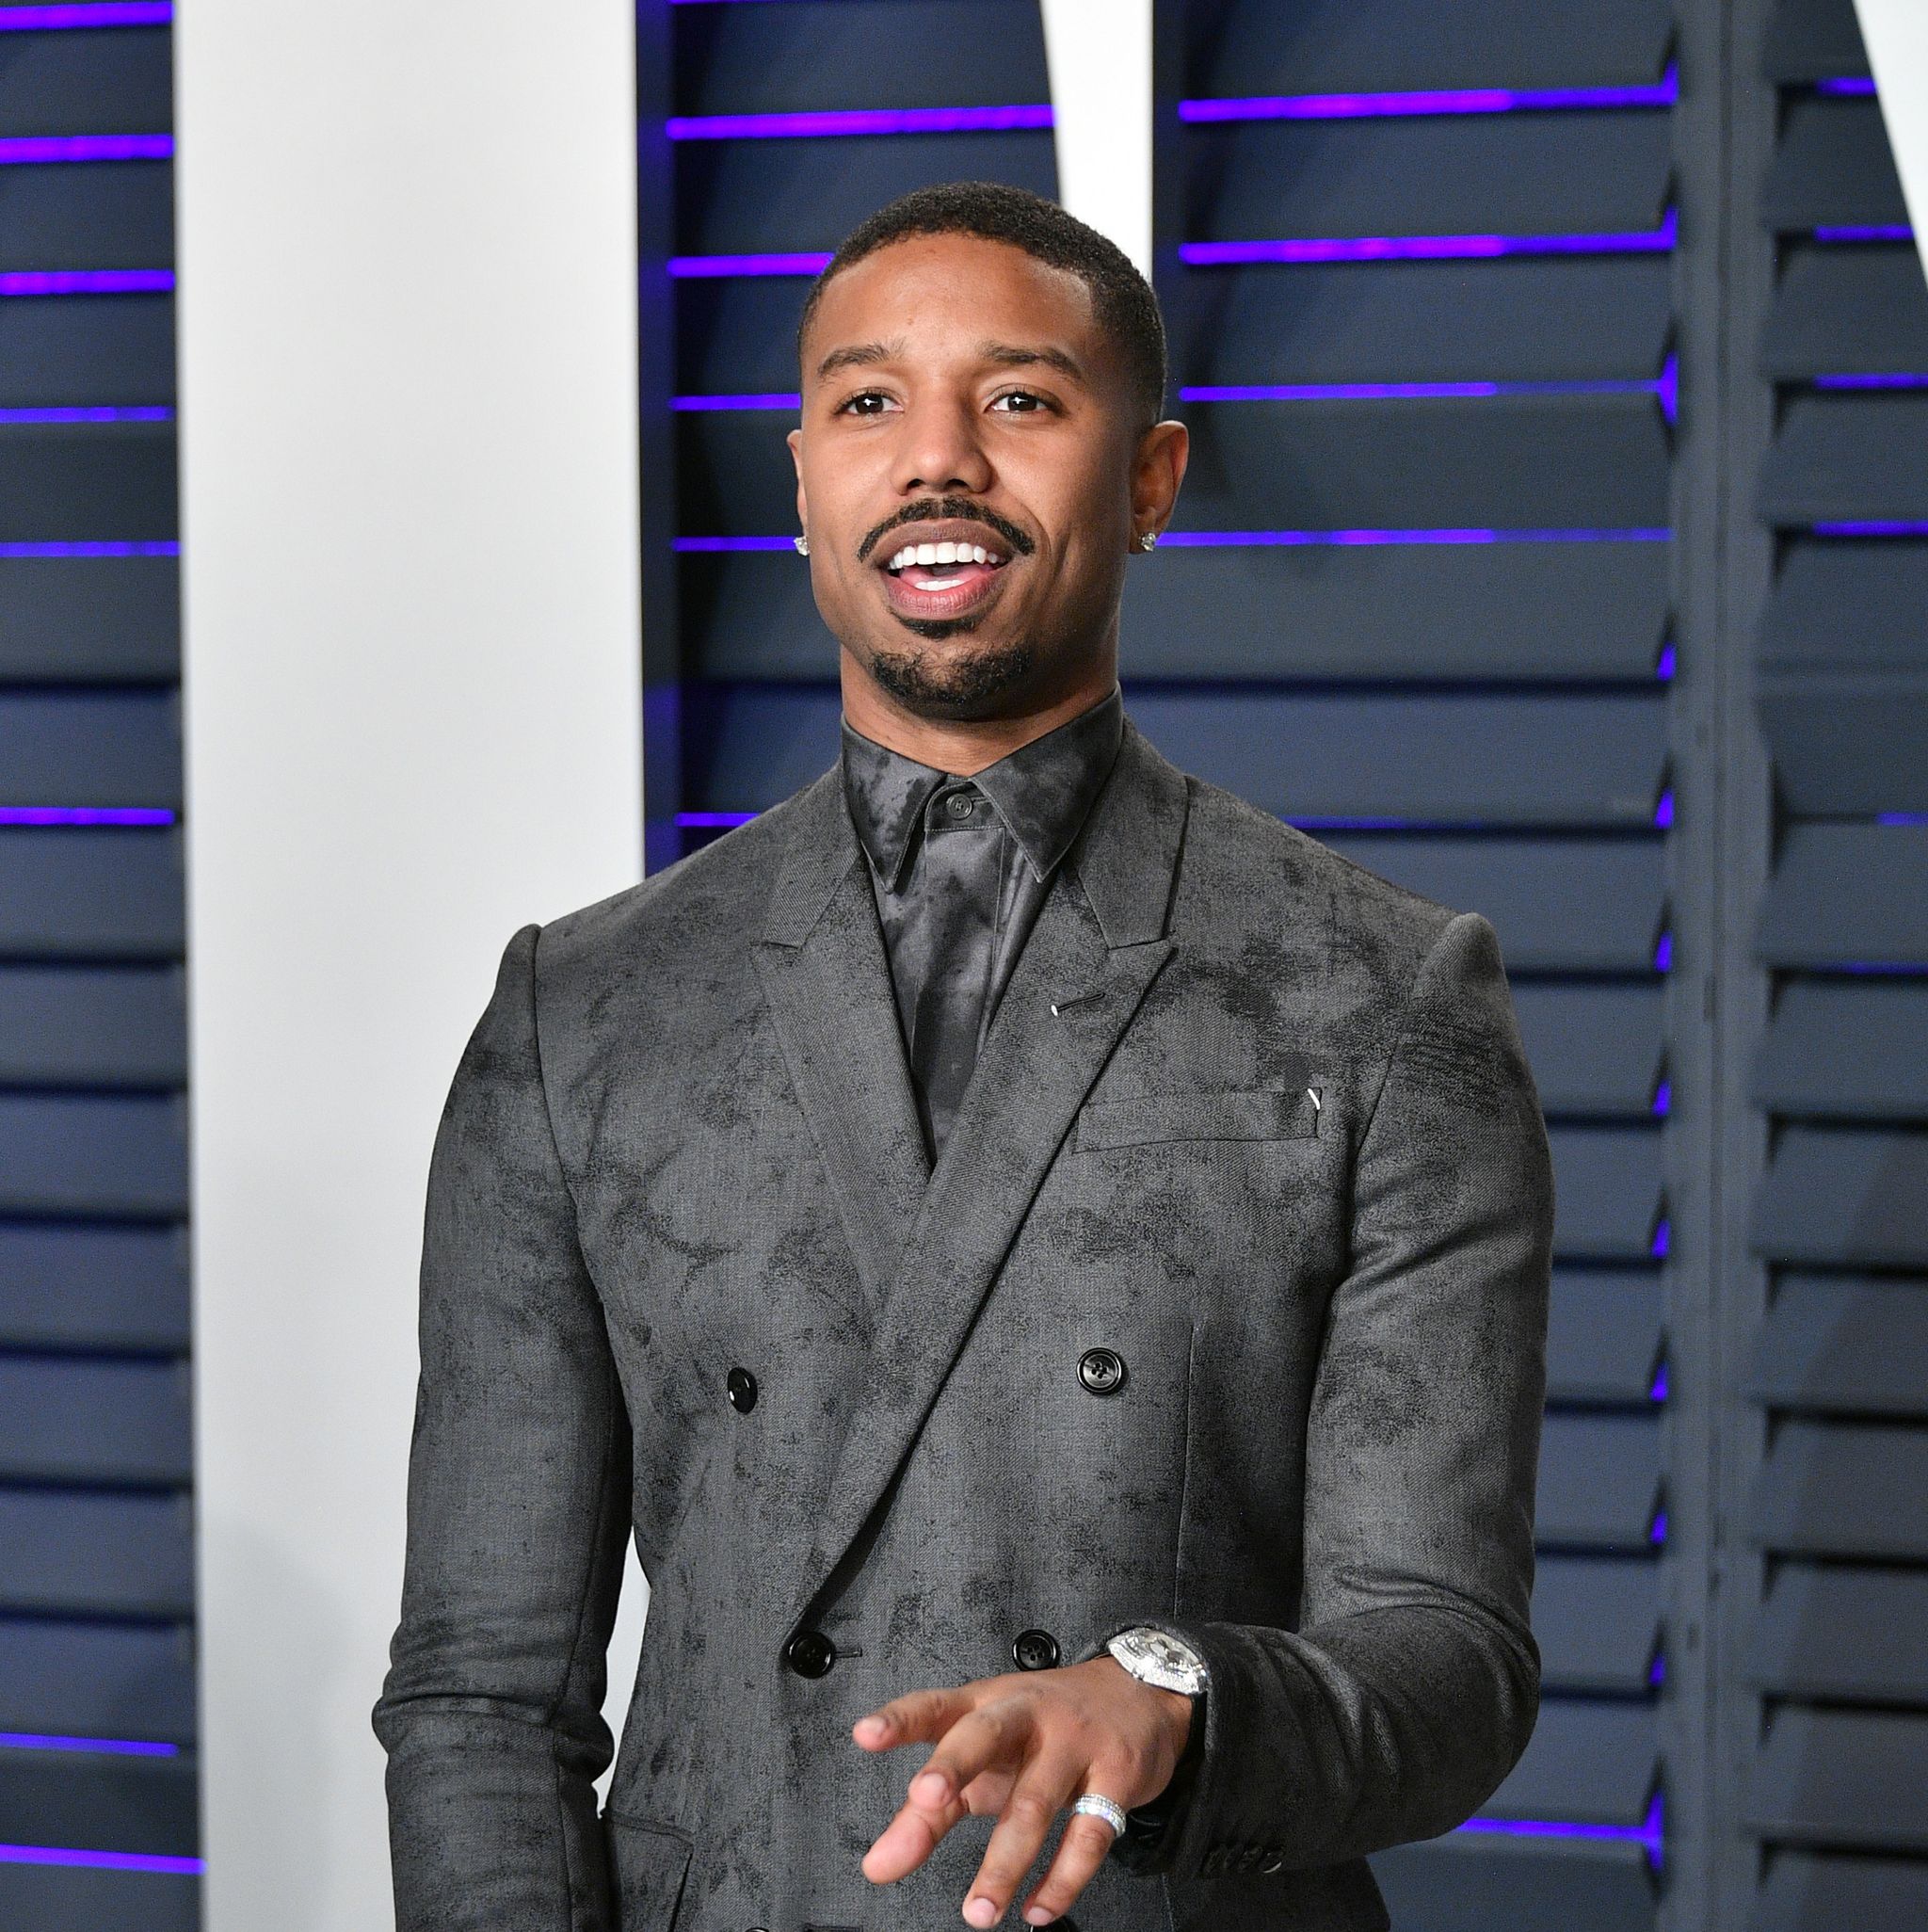 Michael B. Jordan Wore The Best Suit Of The Oscars Afterparties